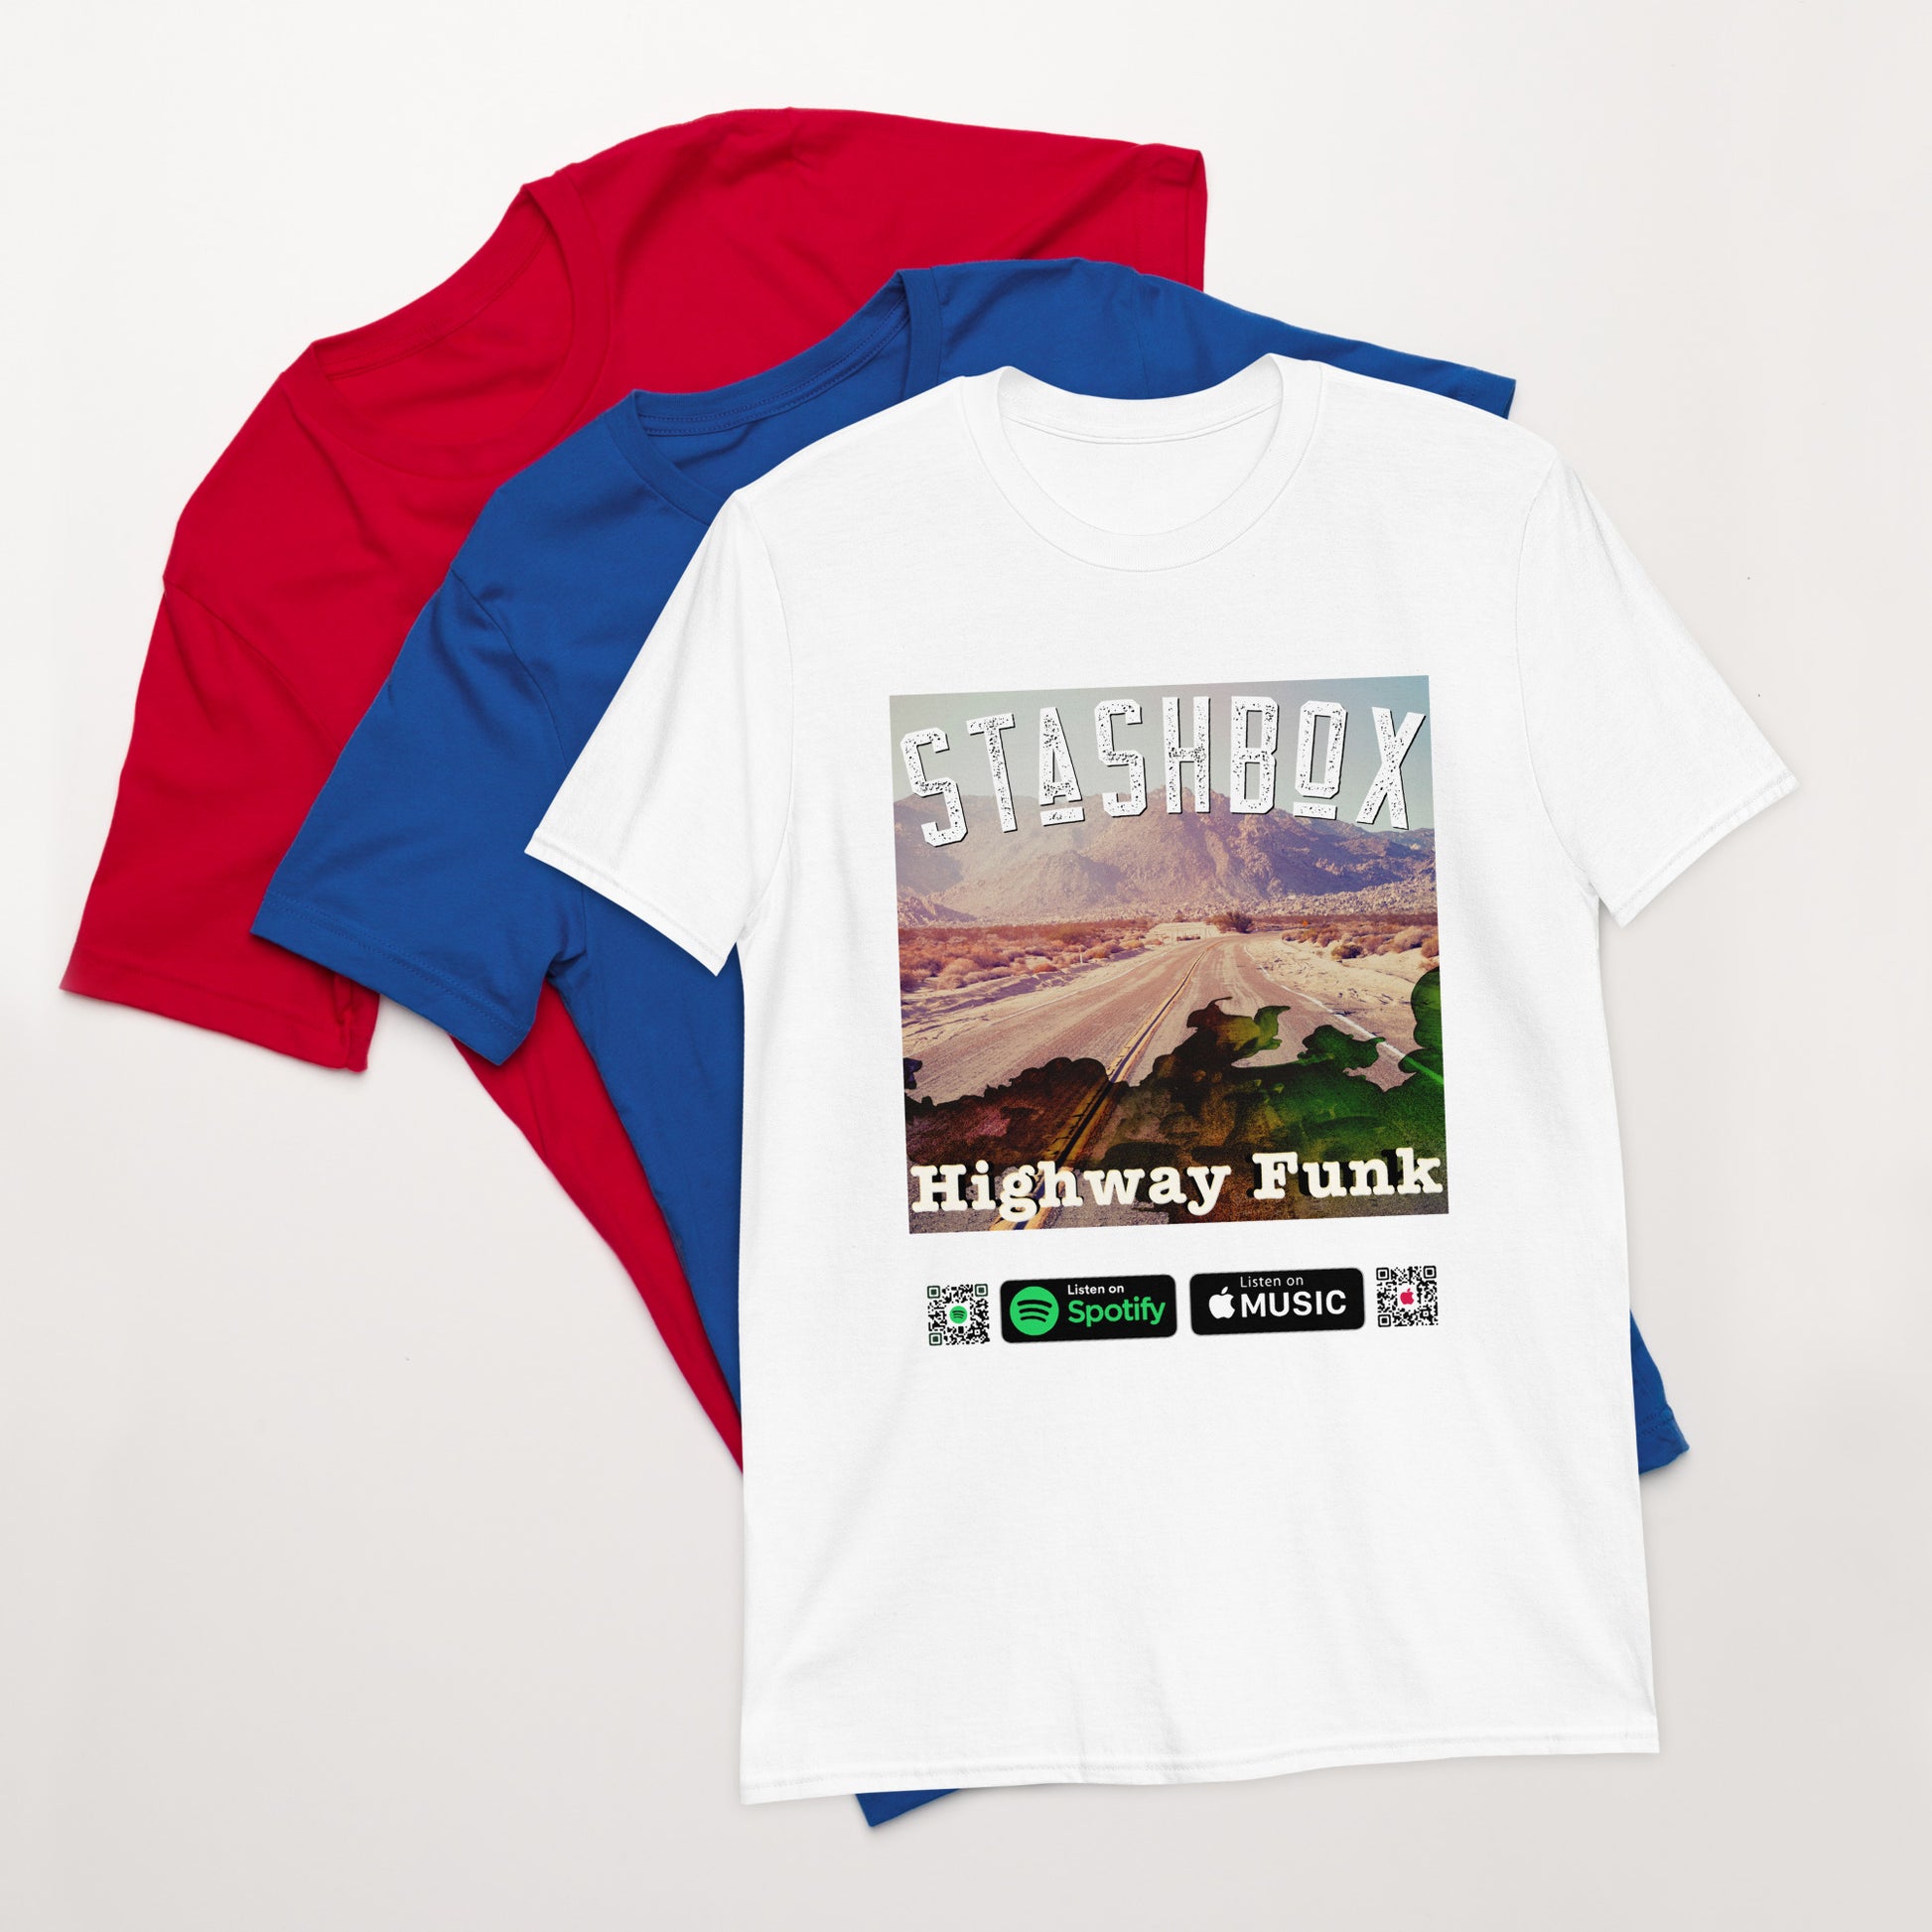 Hit the road in style with our Highway Jam Short-Sleeve Unisex T-Shirt, Design #020 by Stashbox. Your fashion, your journey, exclusively at Stashbox.ai.